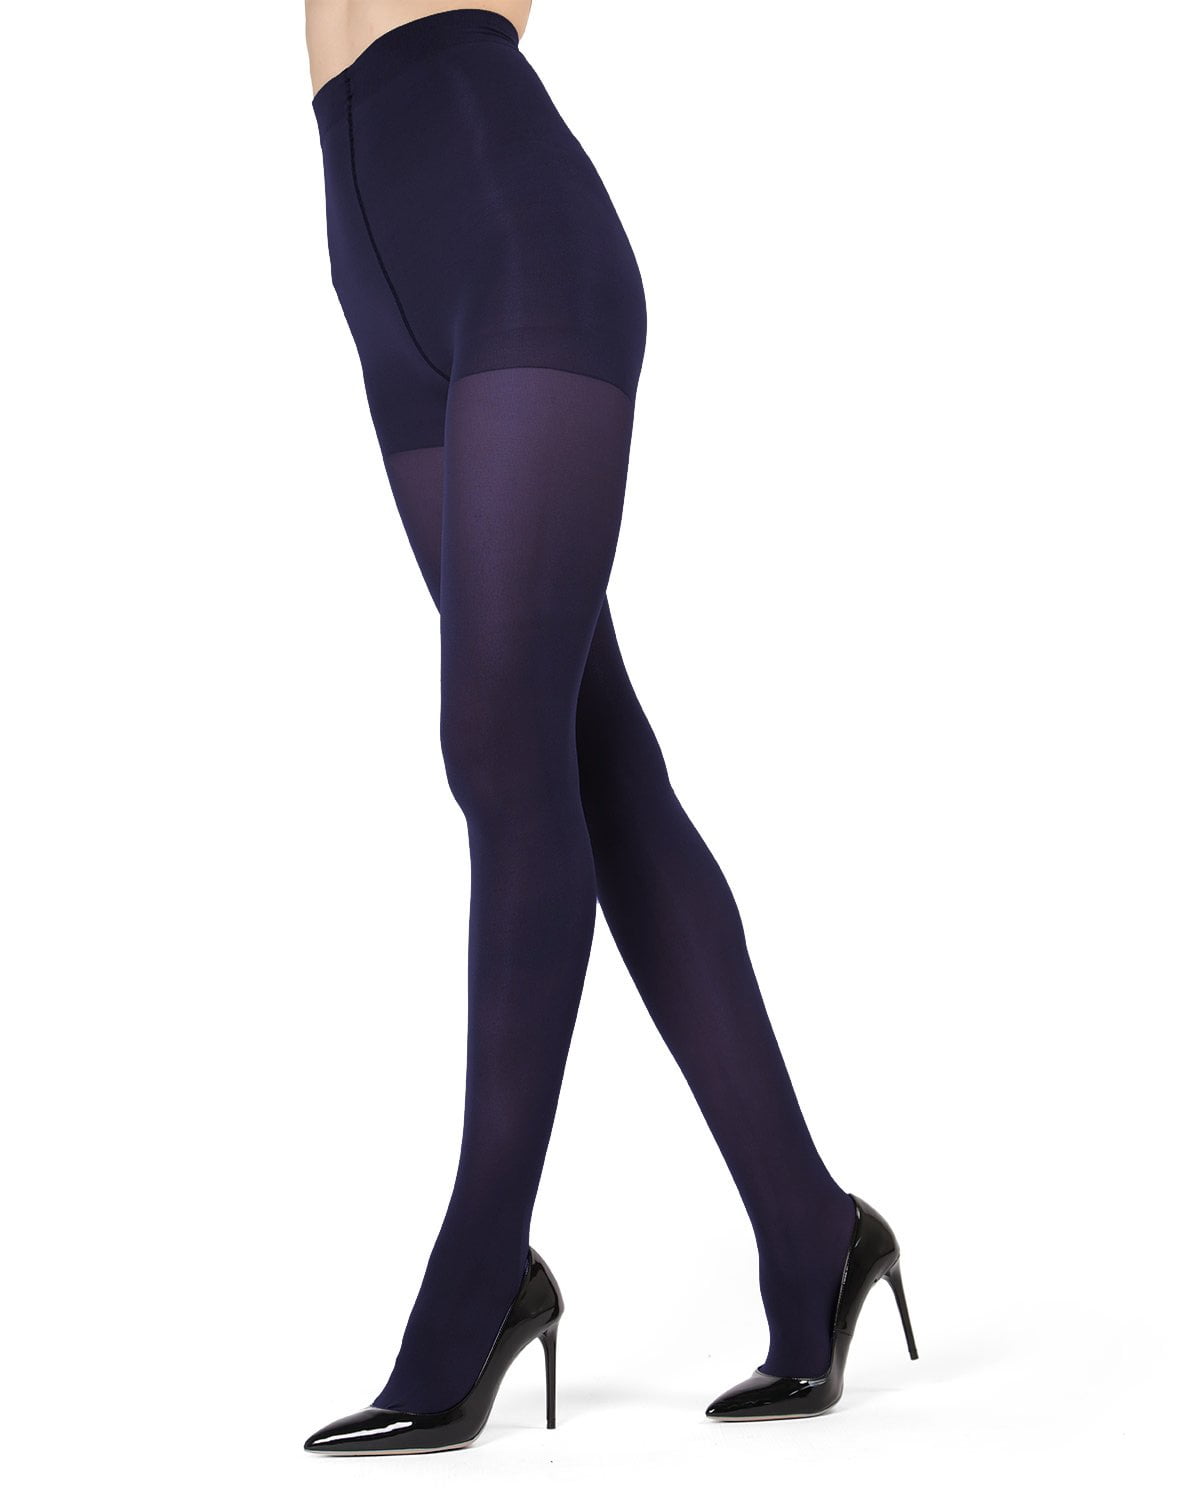 Wholesale Girls Flat Tights in Light Blue - 60 Pairs per case